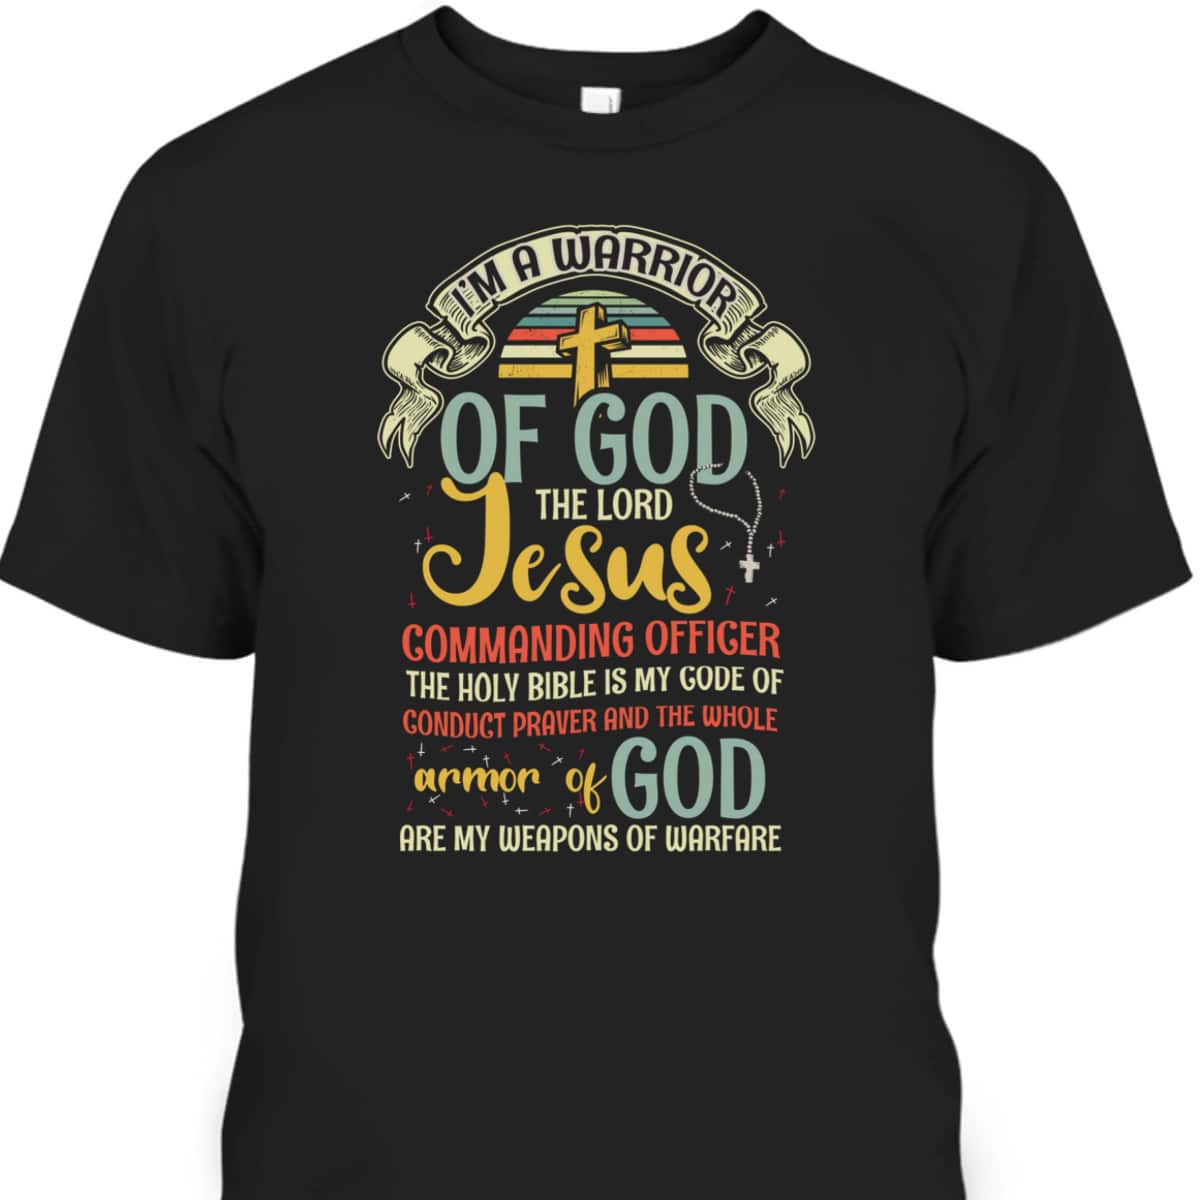 The Lord Jesus Armor Of God Are My Weapons Of Warfare T-Shirt Christian Cross Perfect Gift For Believers